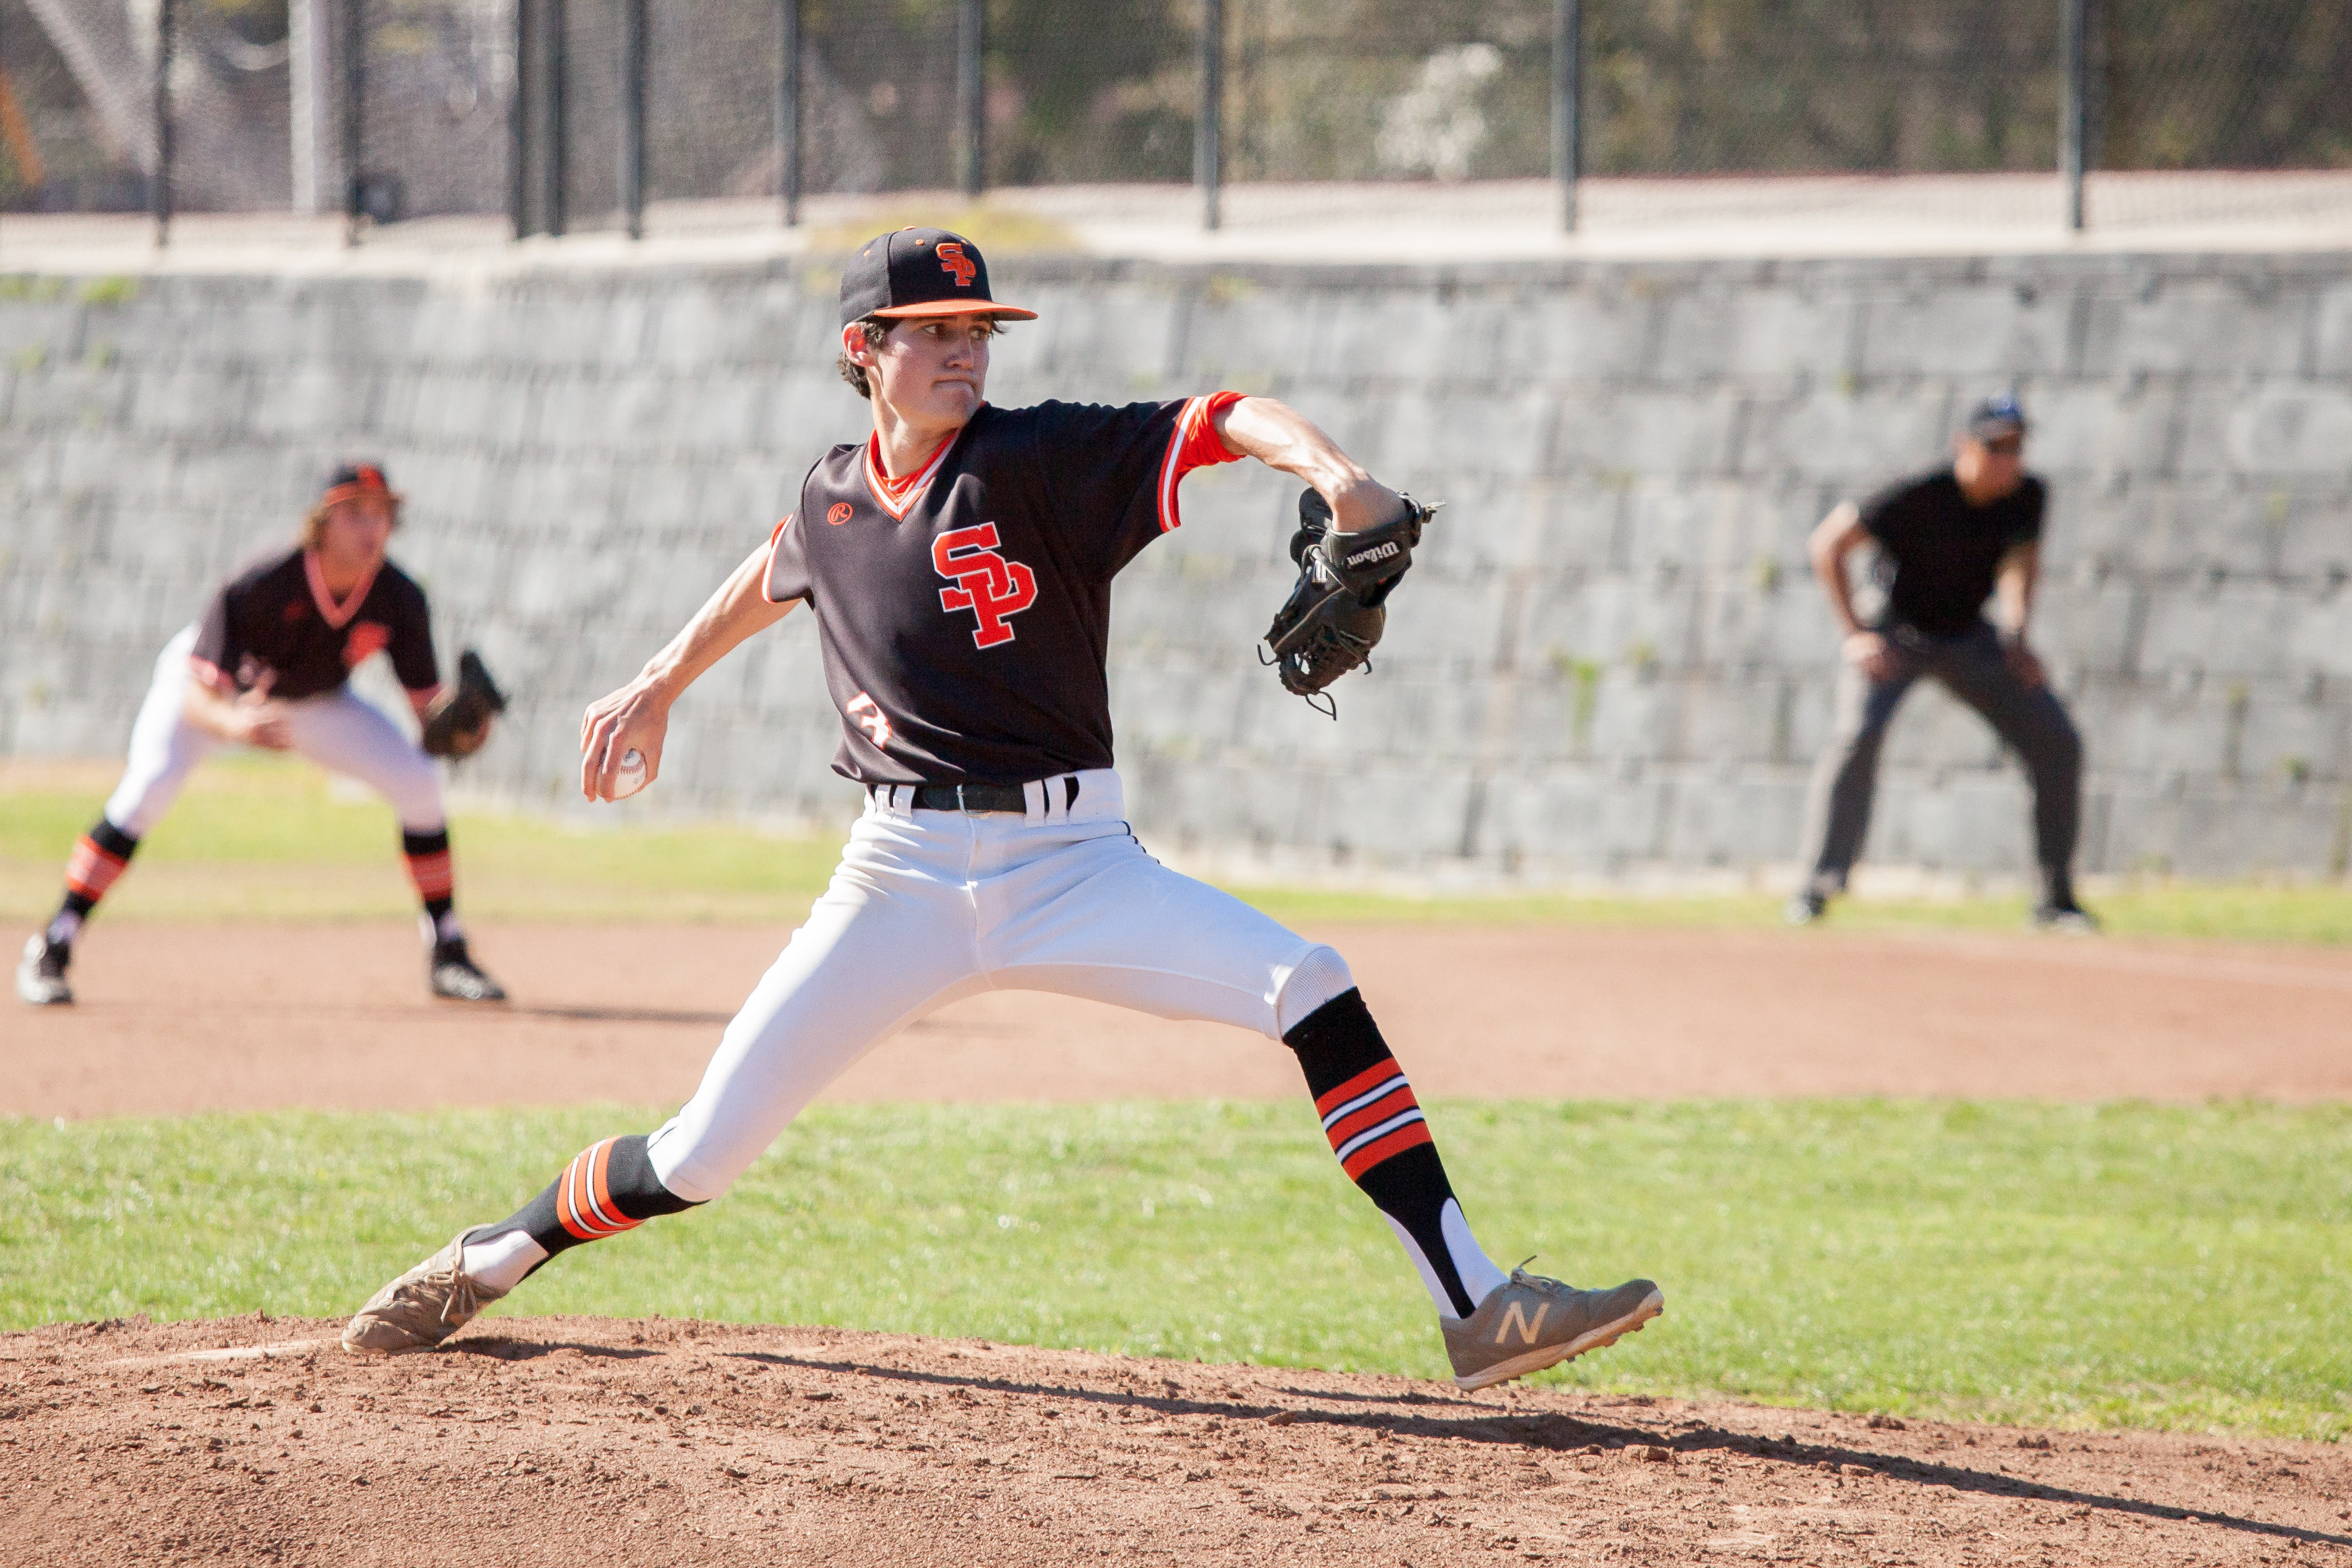 Thumbnail for Baseball’s drought continues with loss to Temple City